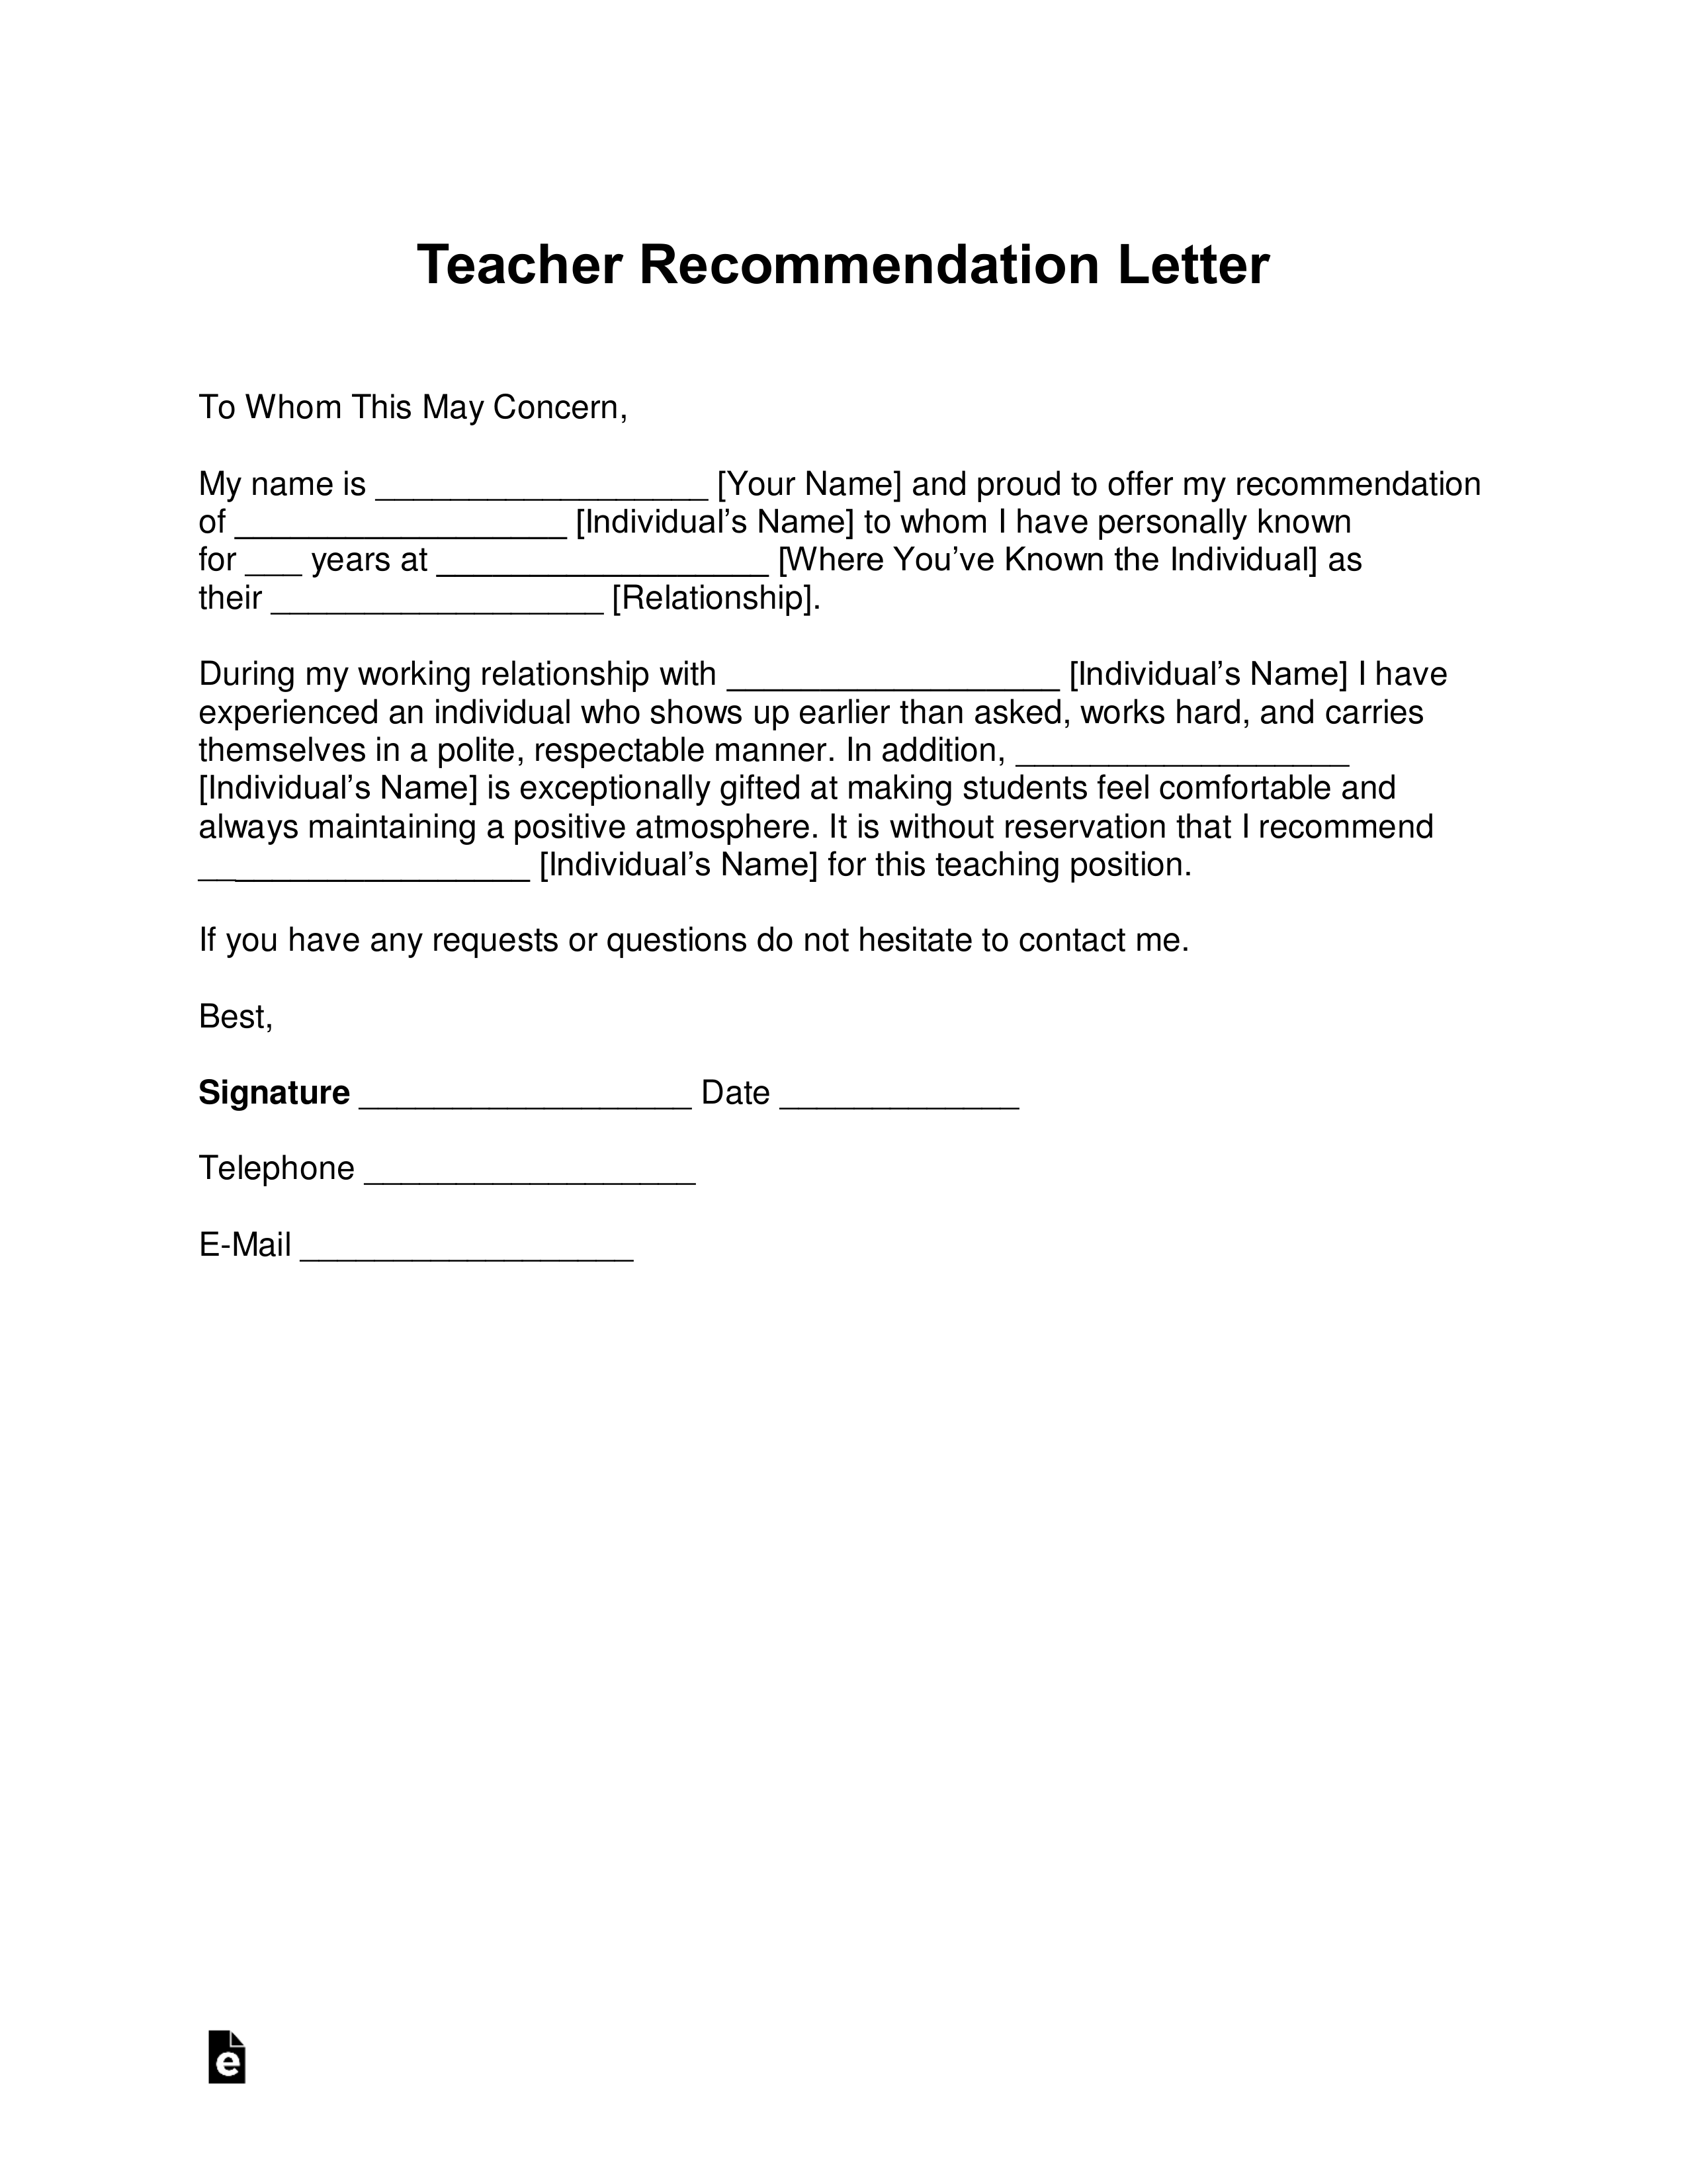 Letter Of Recommendation For A Student Teacher from eforms.com